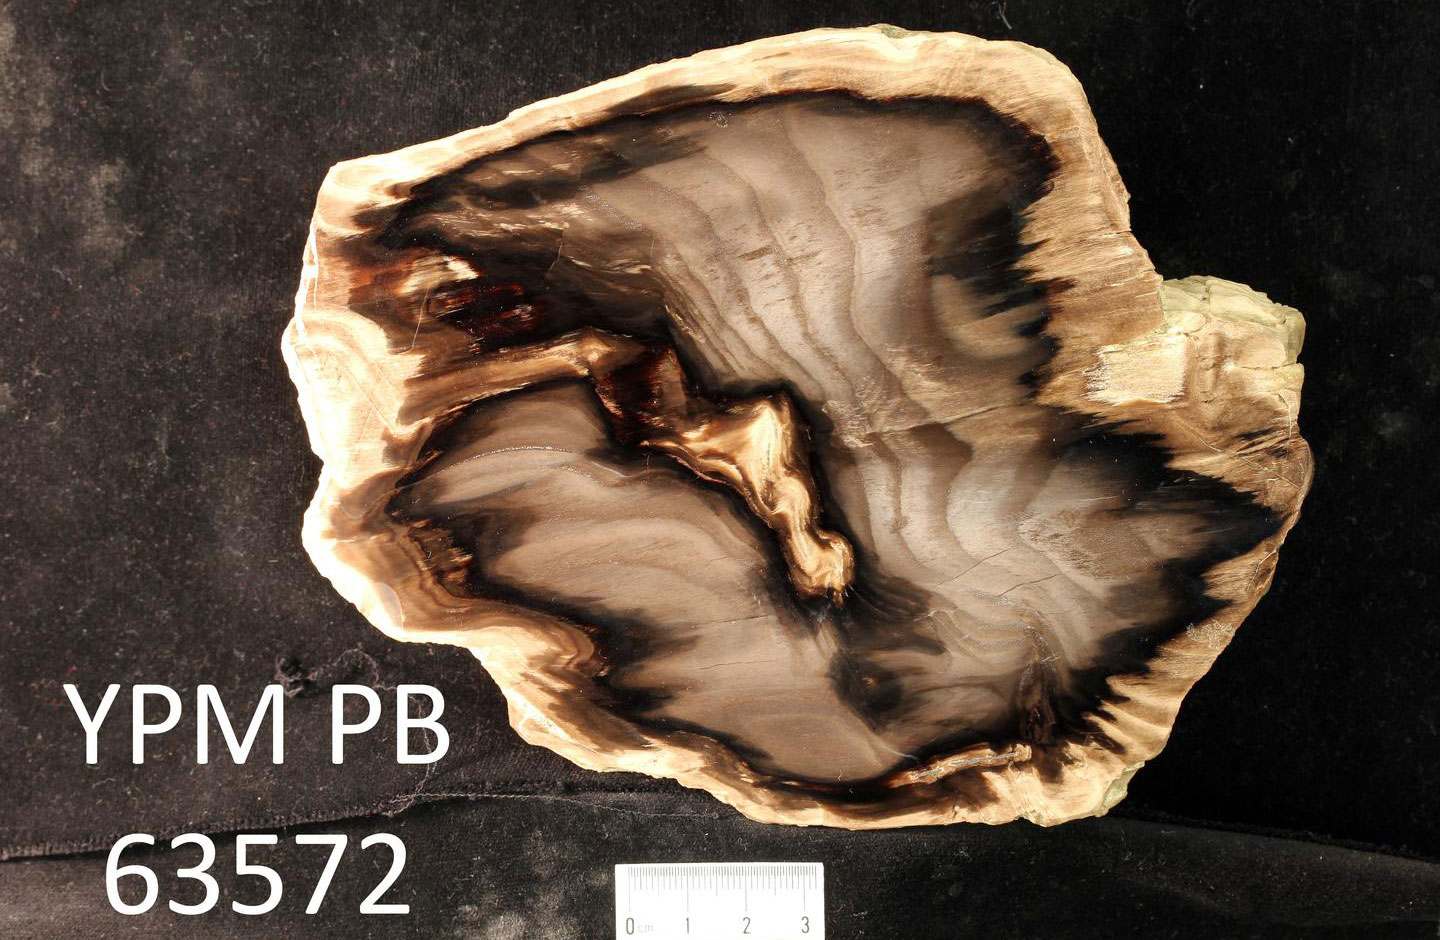 Photograph of a chunk of petrified wood which has been cut and polished on one surface. The grown rings of the wood can be seen has dark lines on the polished surface. The wood is from the Oligocene of Oregon.